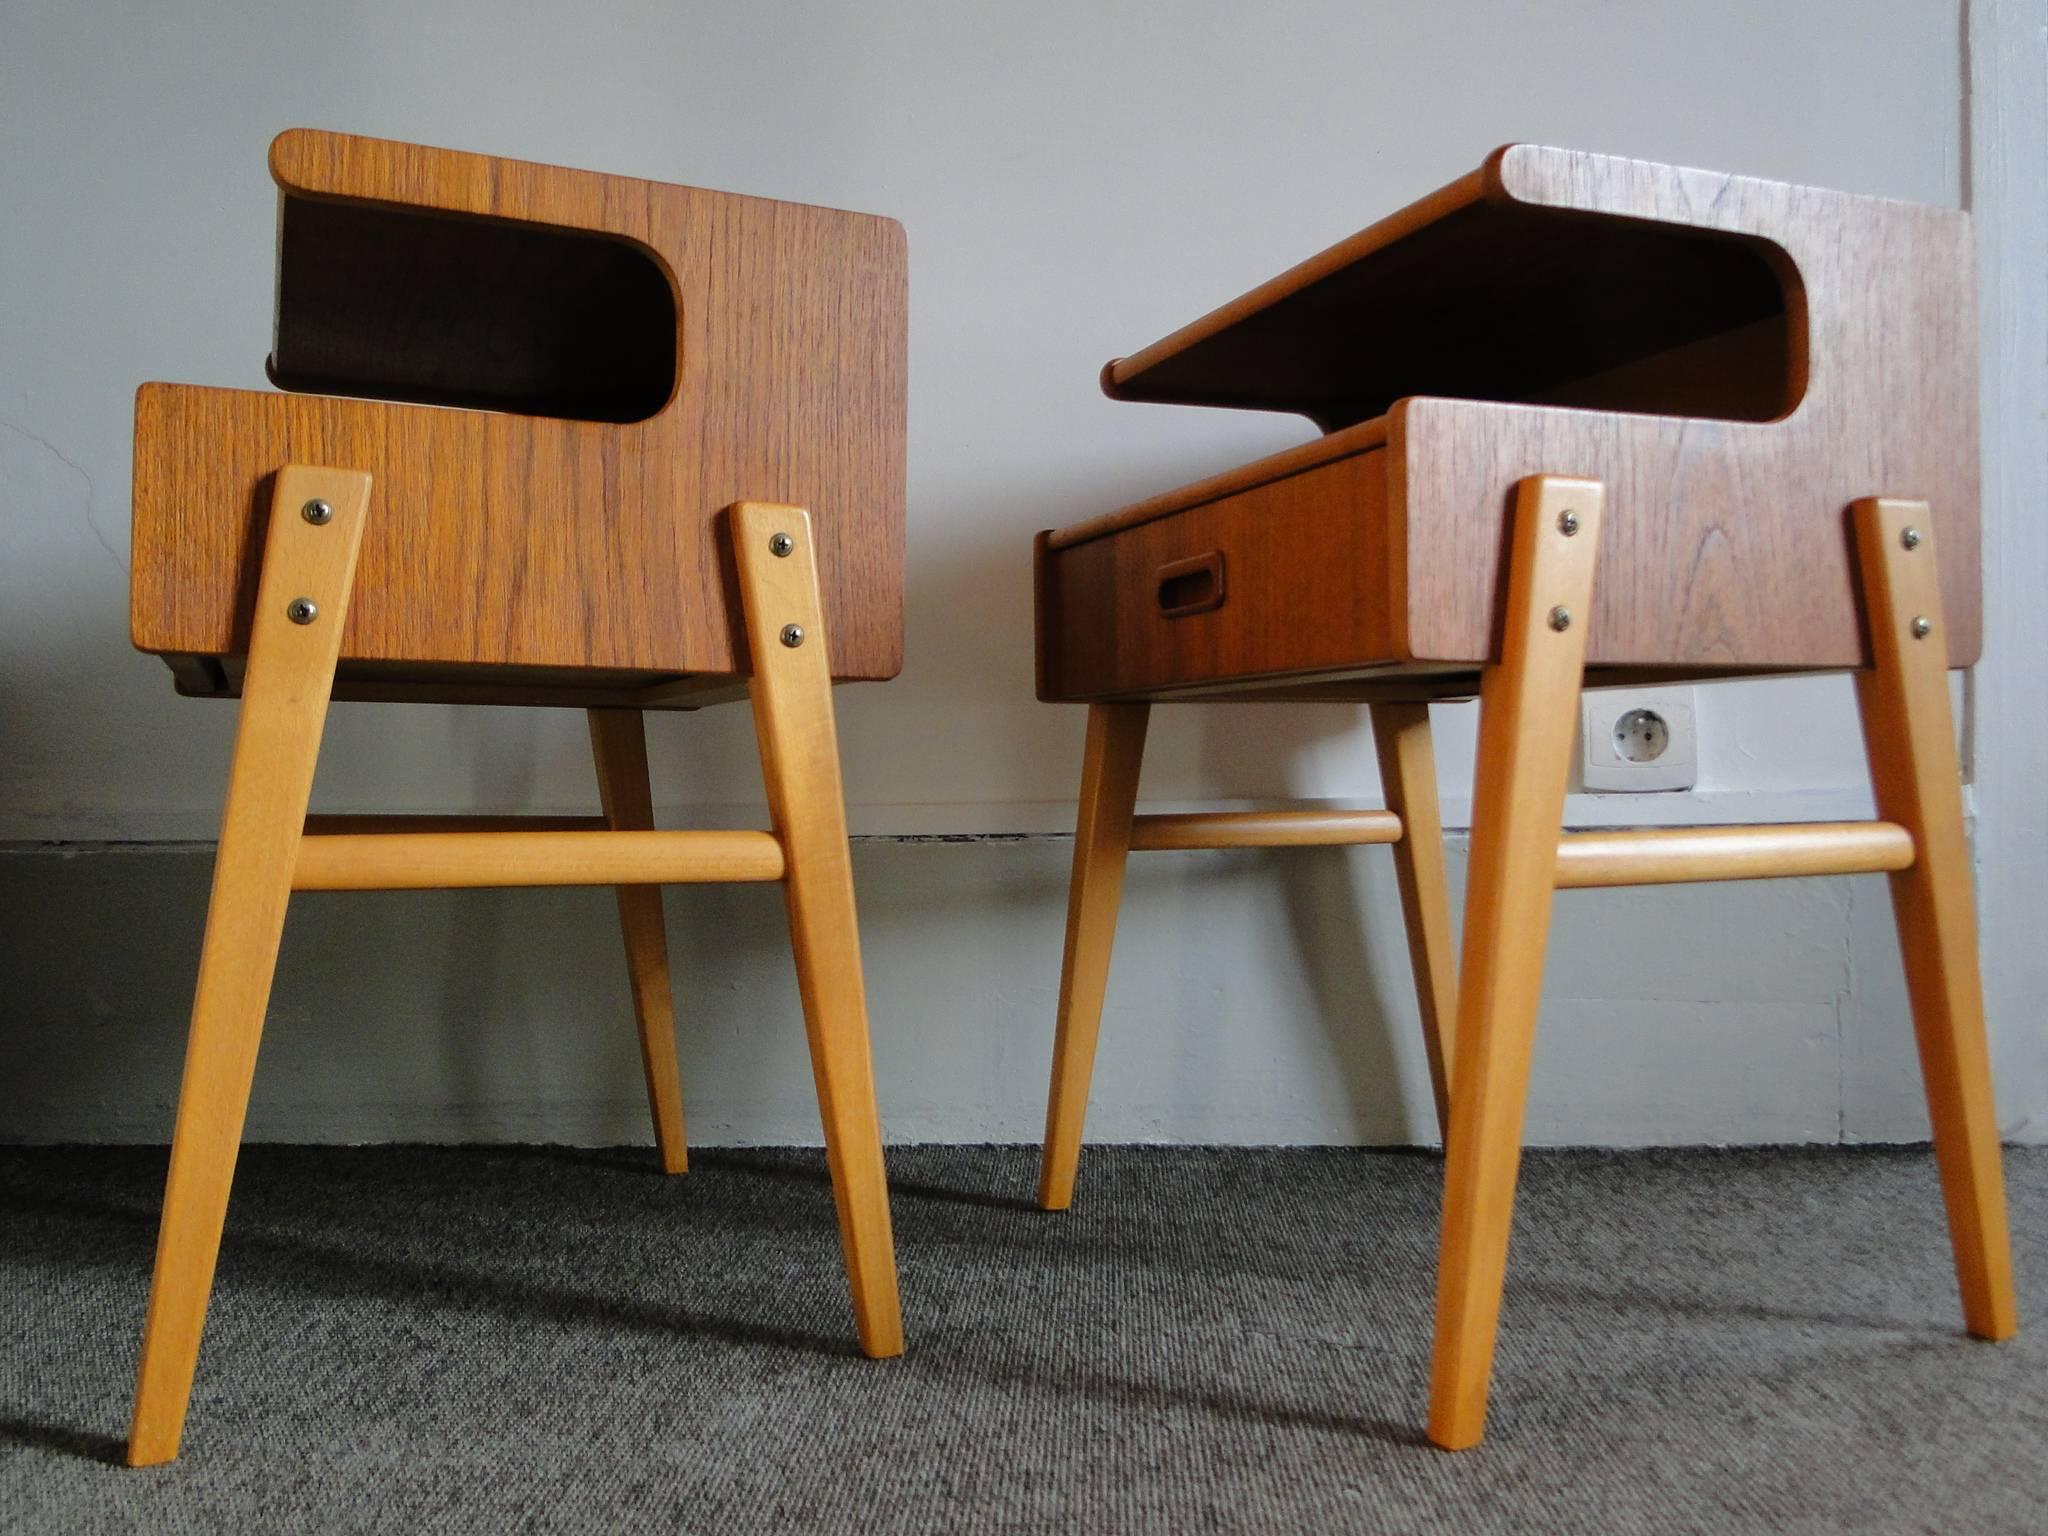 Pair of Classic nightstands by Børge Mogensen for Soborg Mobler, Denmark, circa 1960s. Teak with white laminate drop fronts. Open shelf above drop front for extra storage.